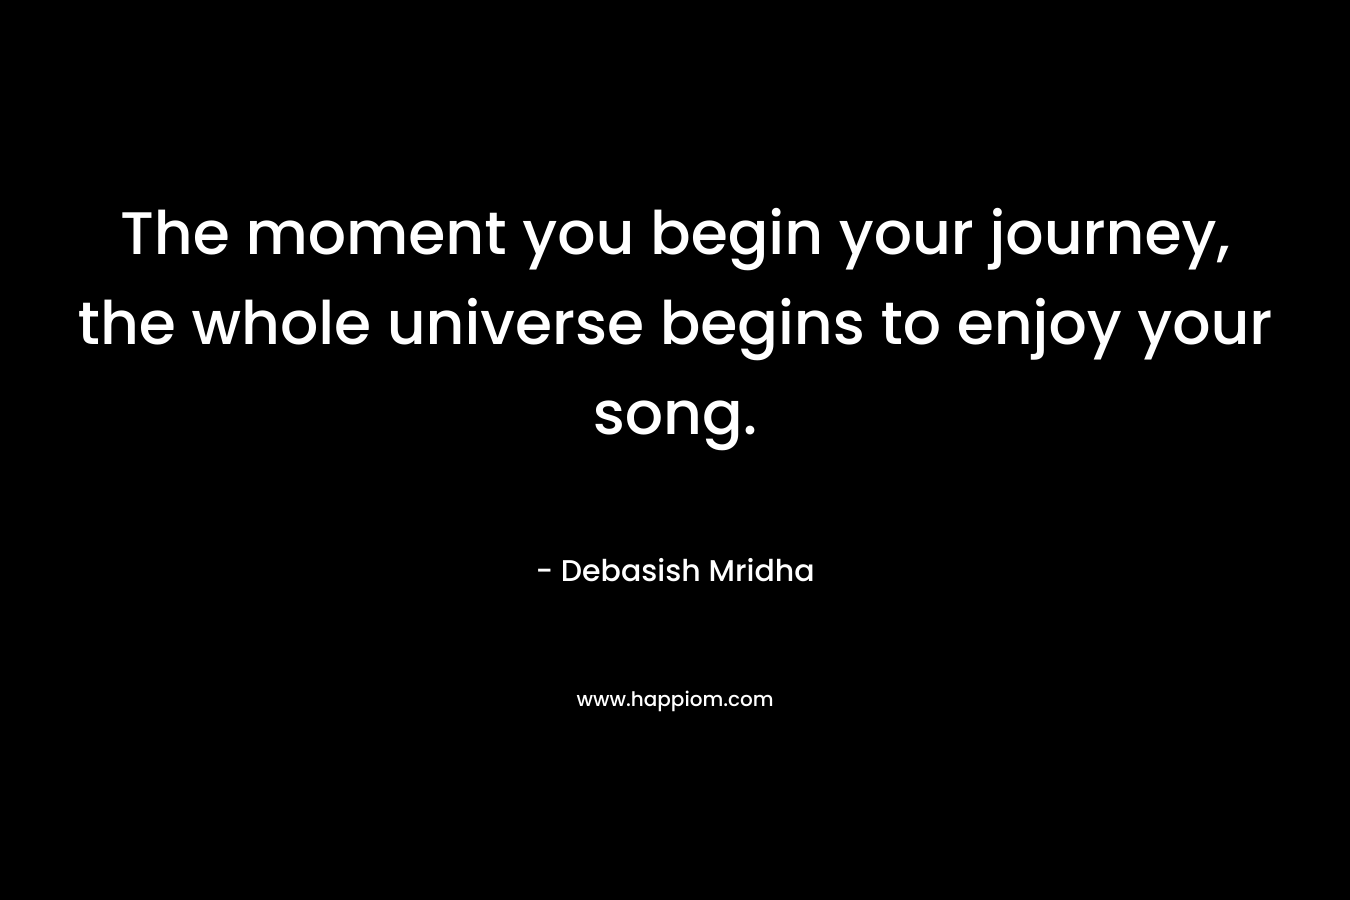 The moment you begin your journey, the whole universe begins to enjoy your song.